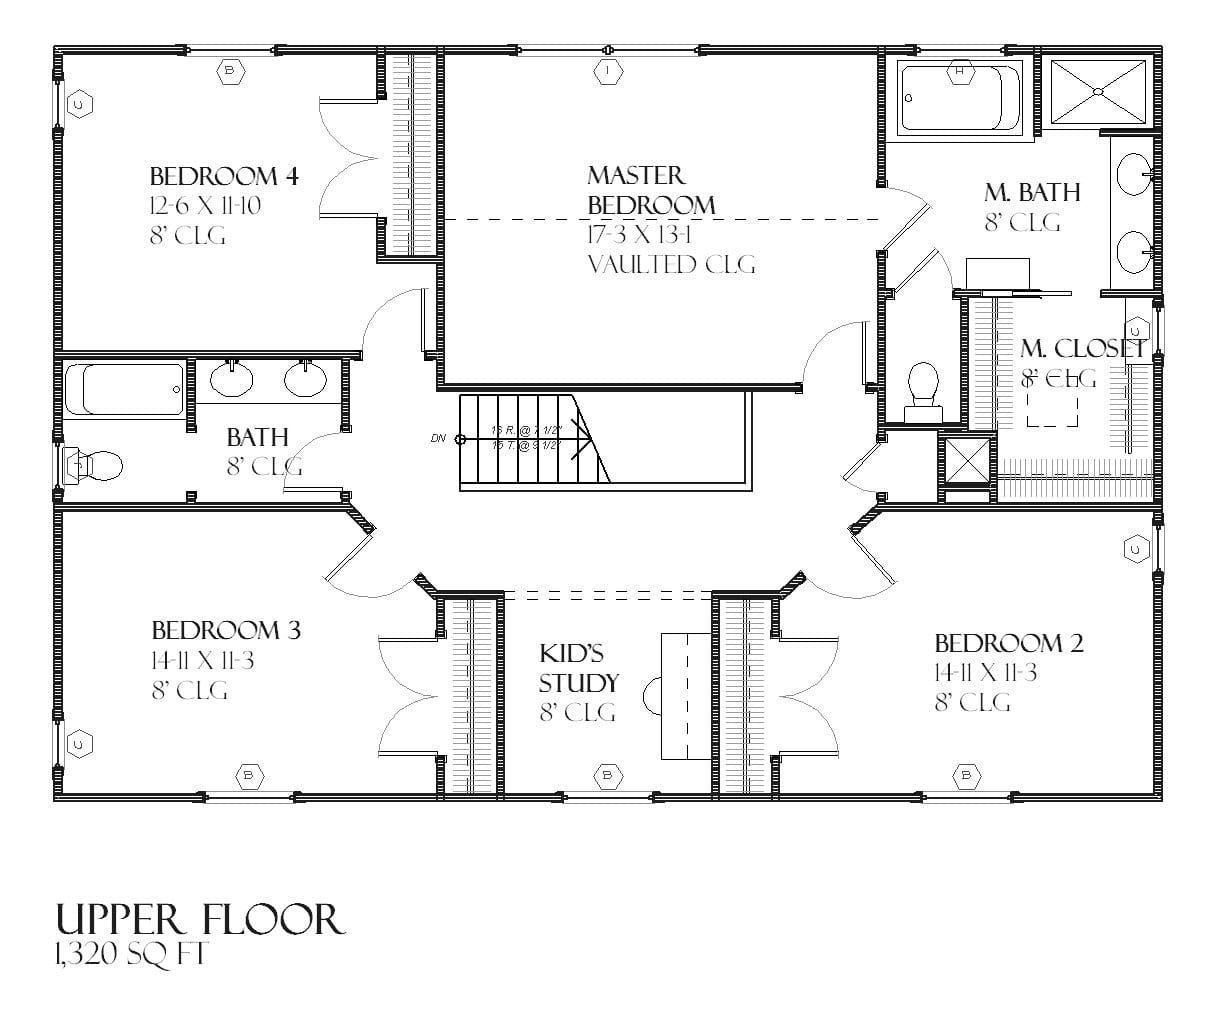 Rexford - Home Design and Floor Plan - SketchPad House Plans